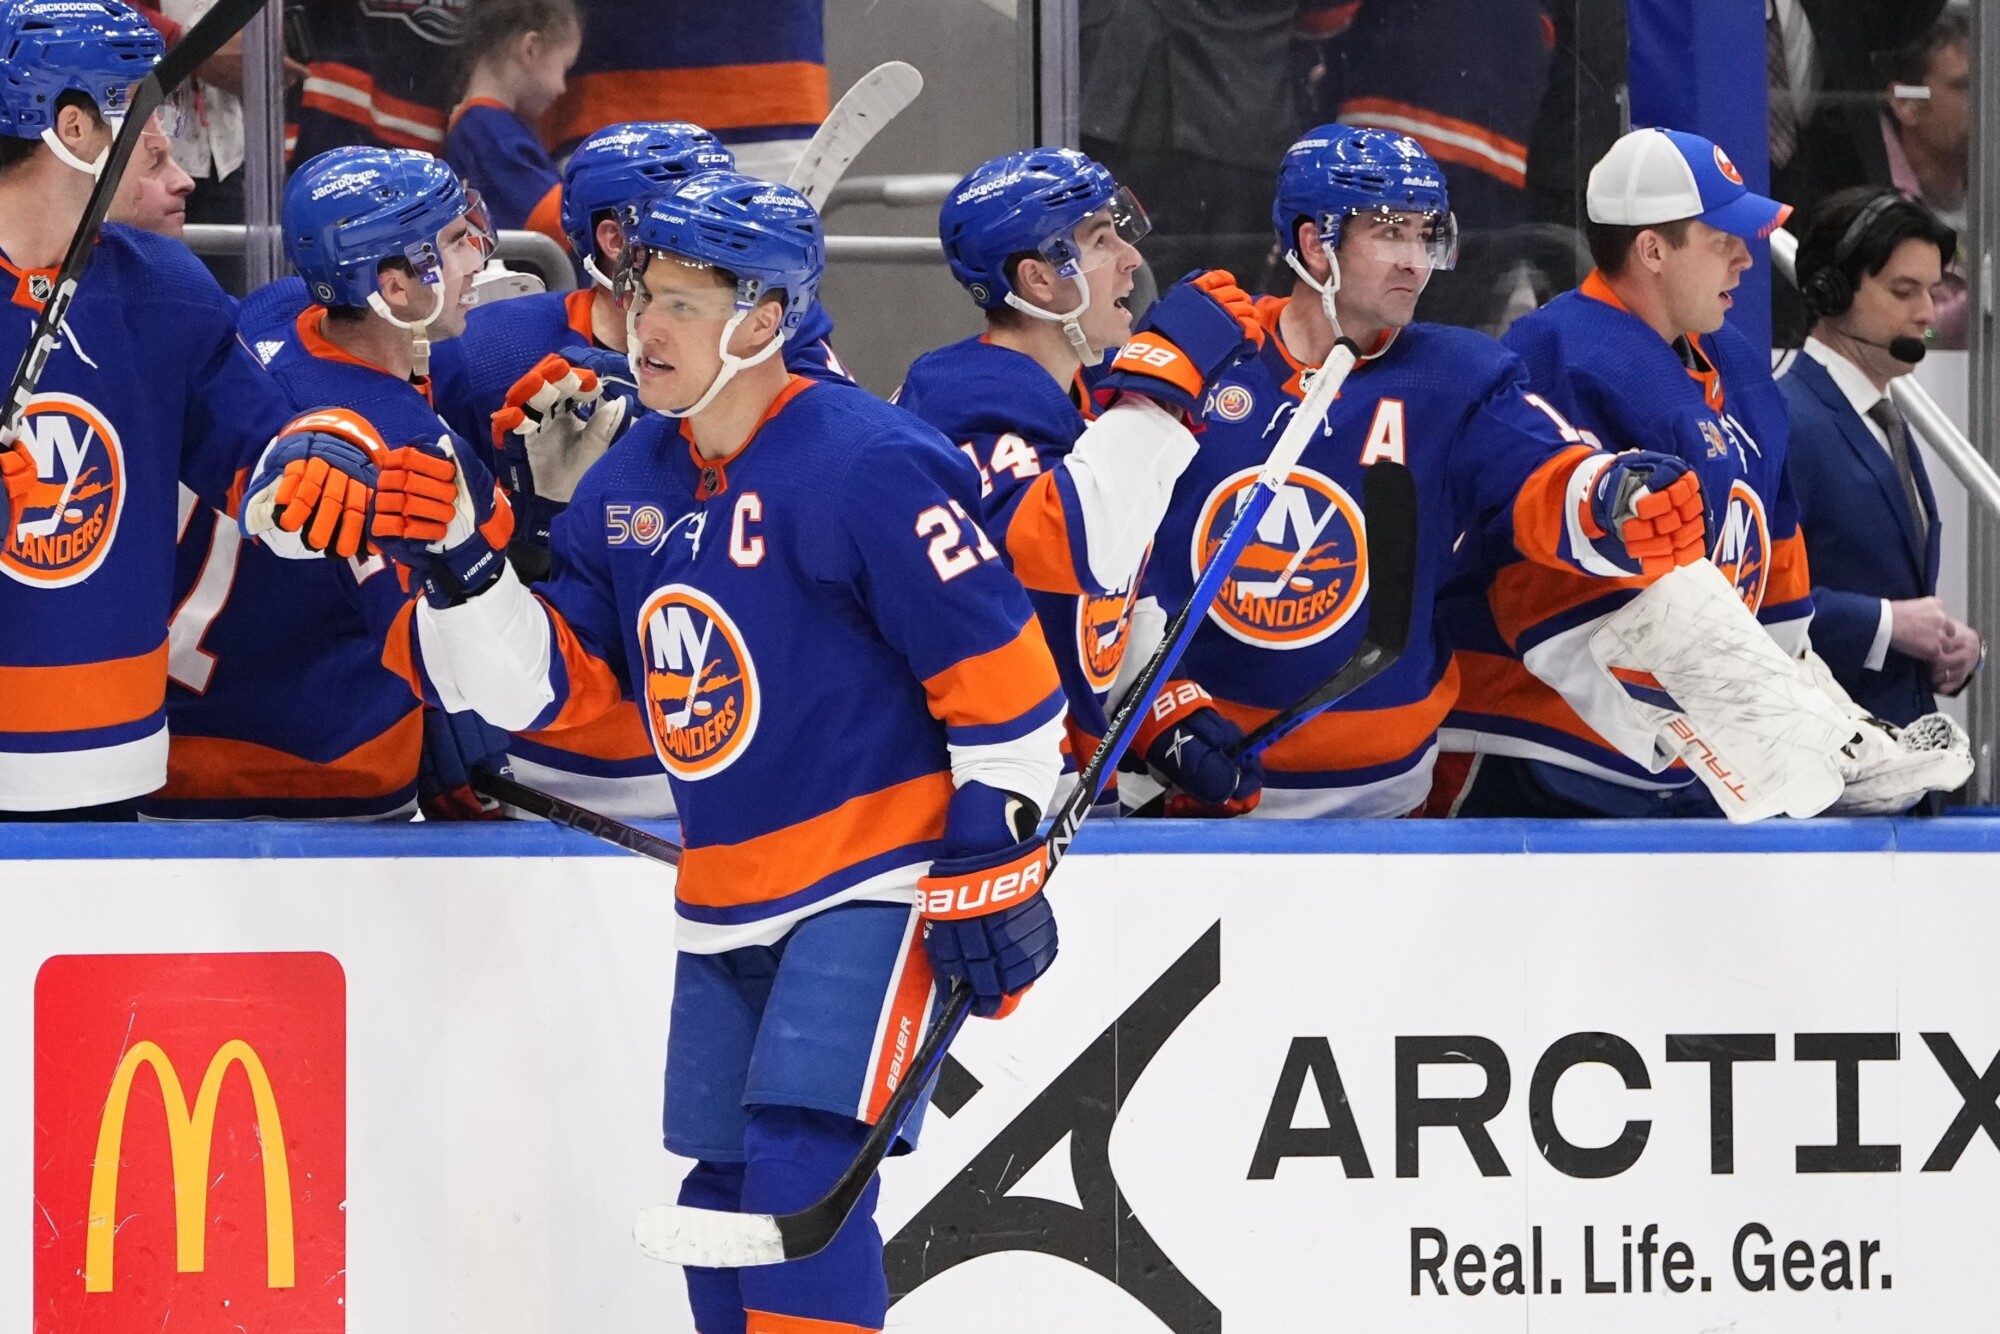 Nelson's 3-goal third period powers Islanders past Stars 4-2 - The